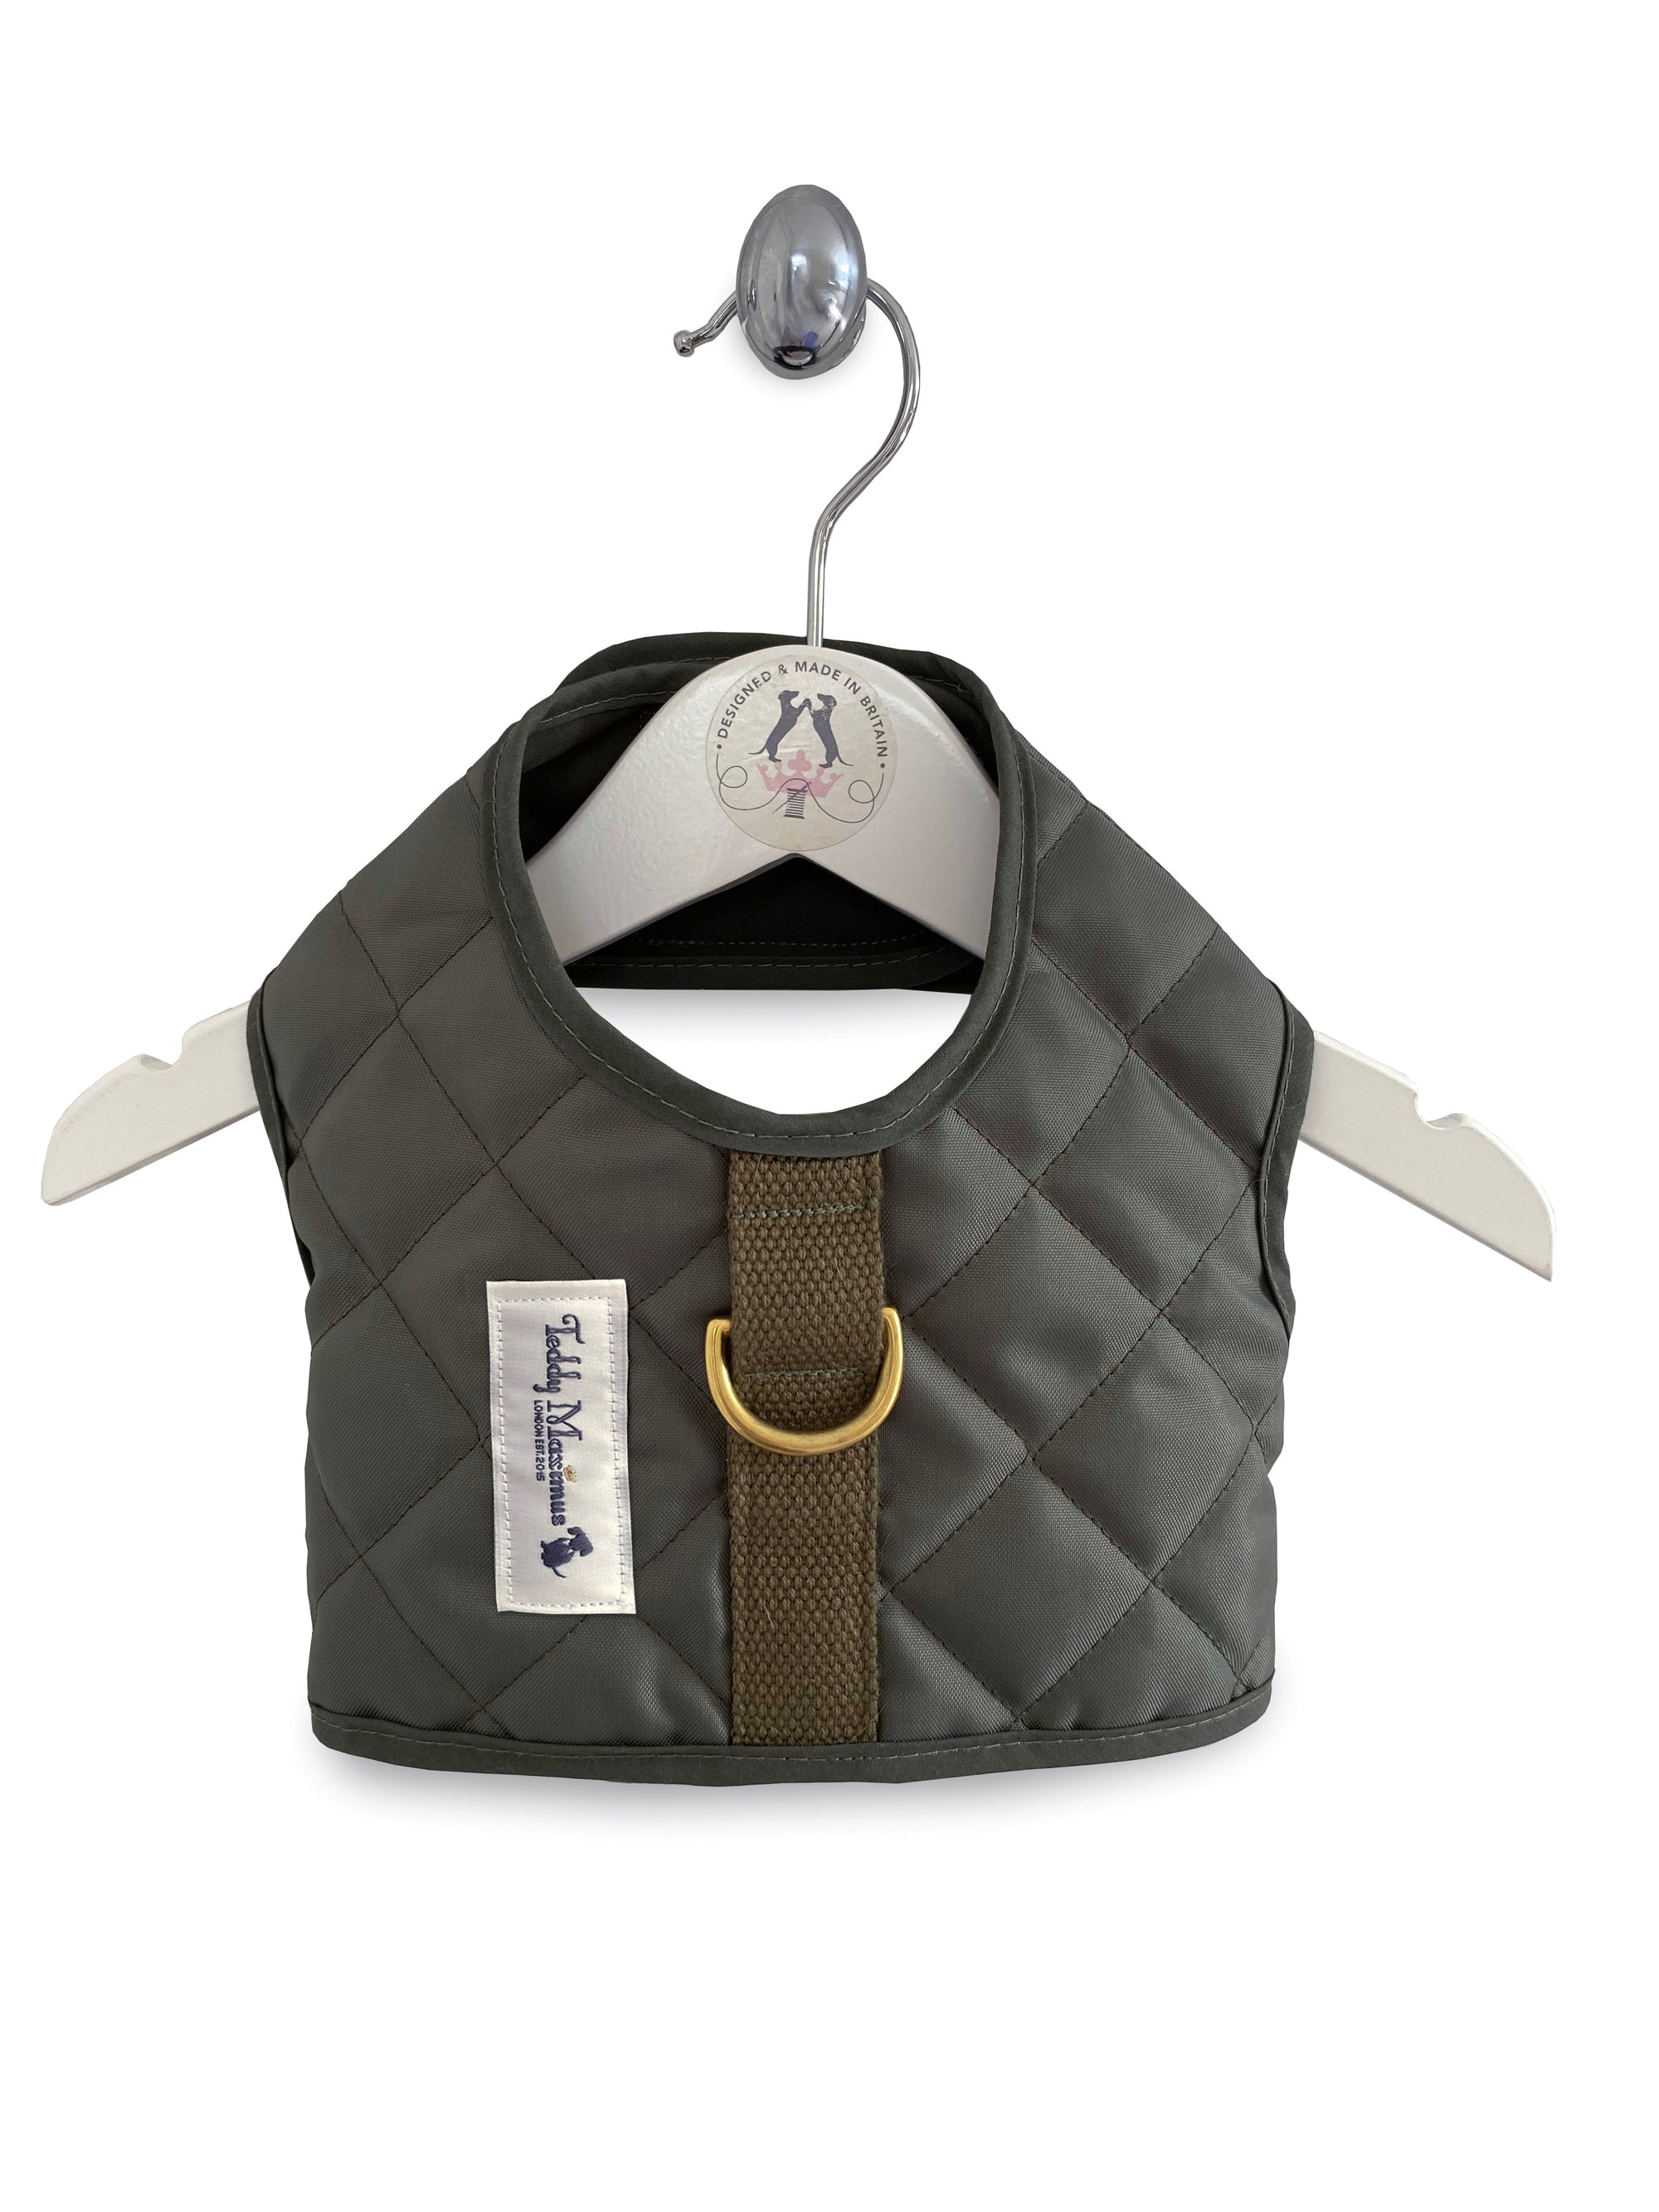 The Explorer Quilted Comfort Dog Harness